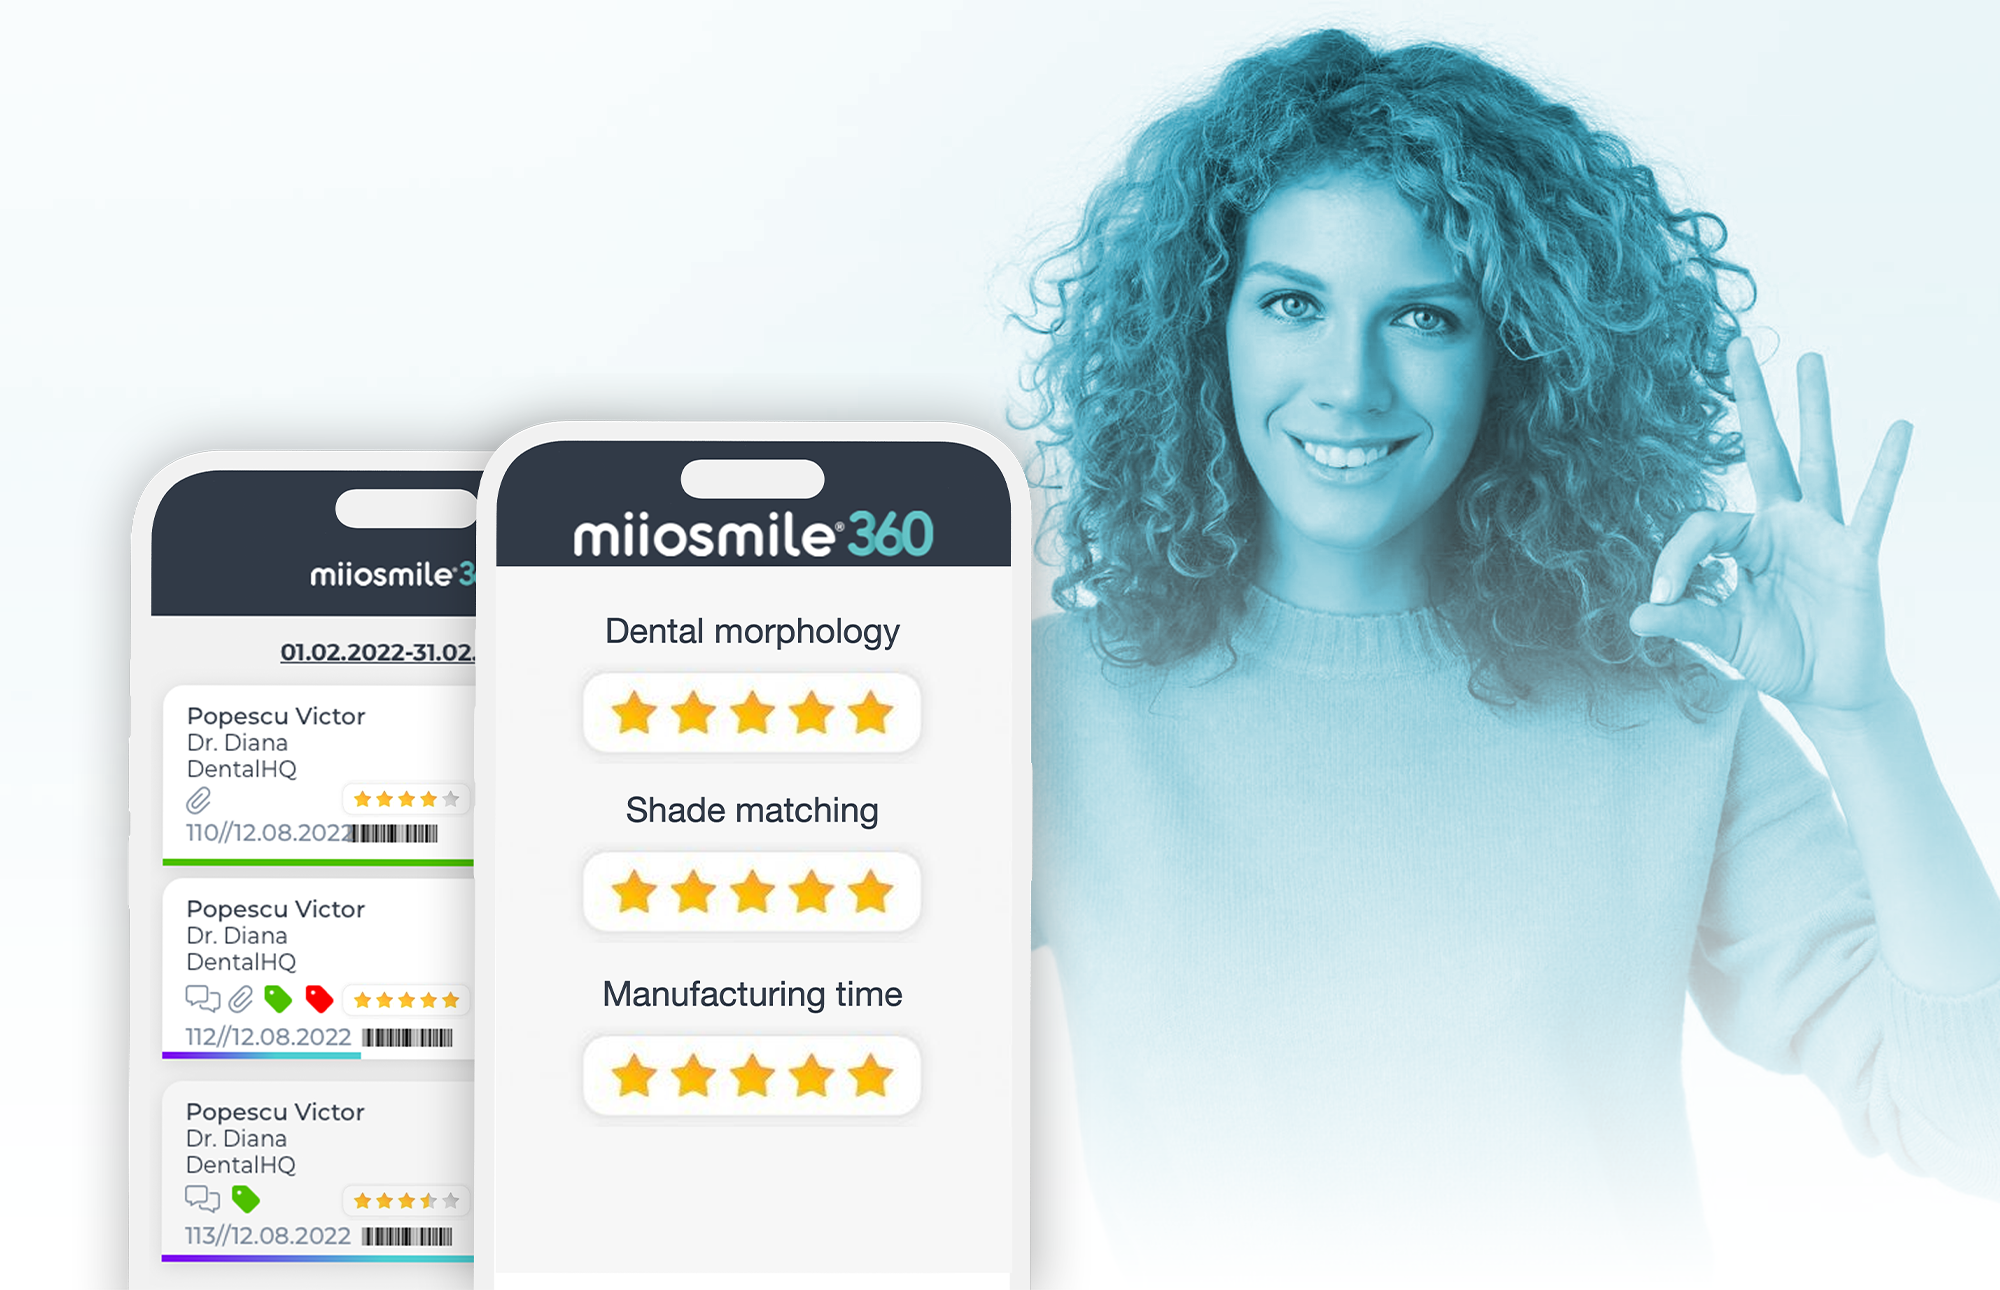 Through miiosmile360, labs can customize the questions in the questionnaire to get relevant and detailed feedback about the quality of dental restorations.